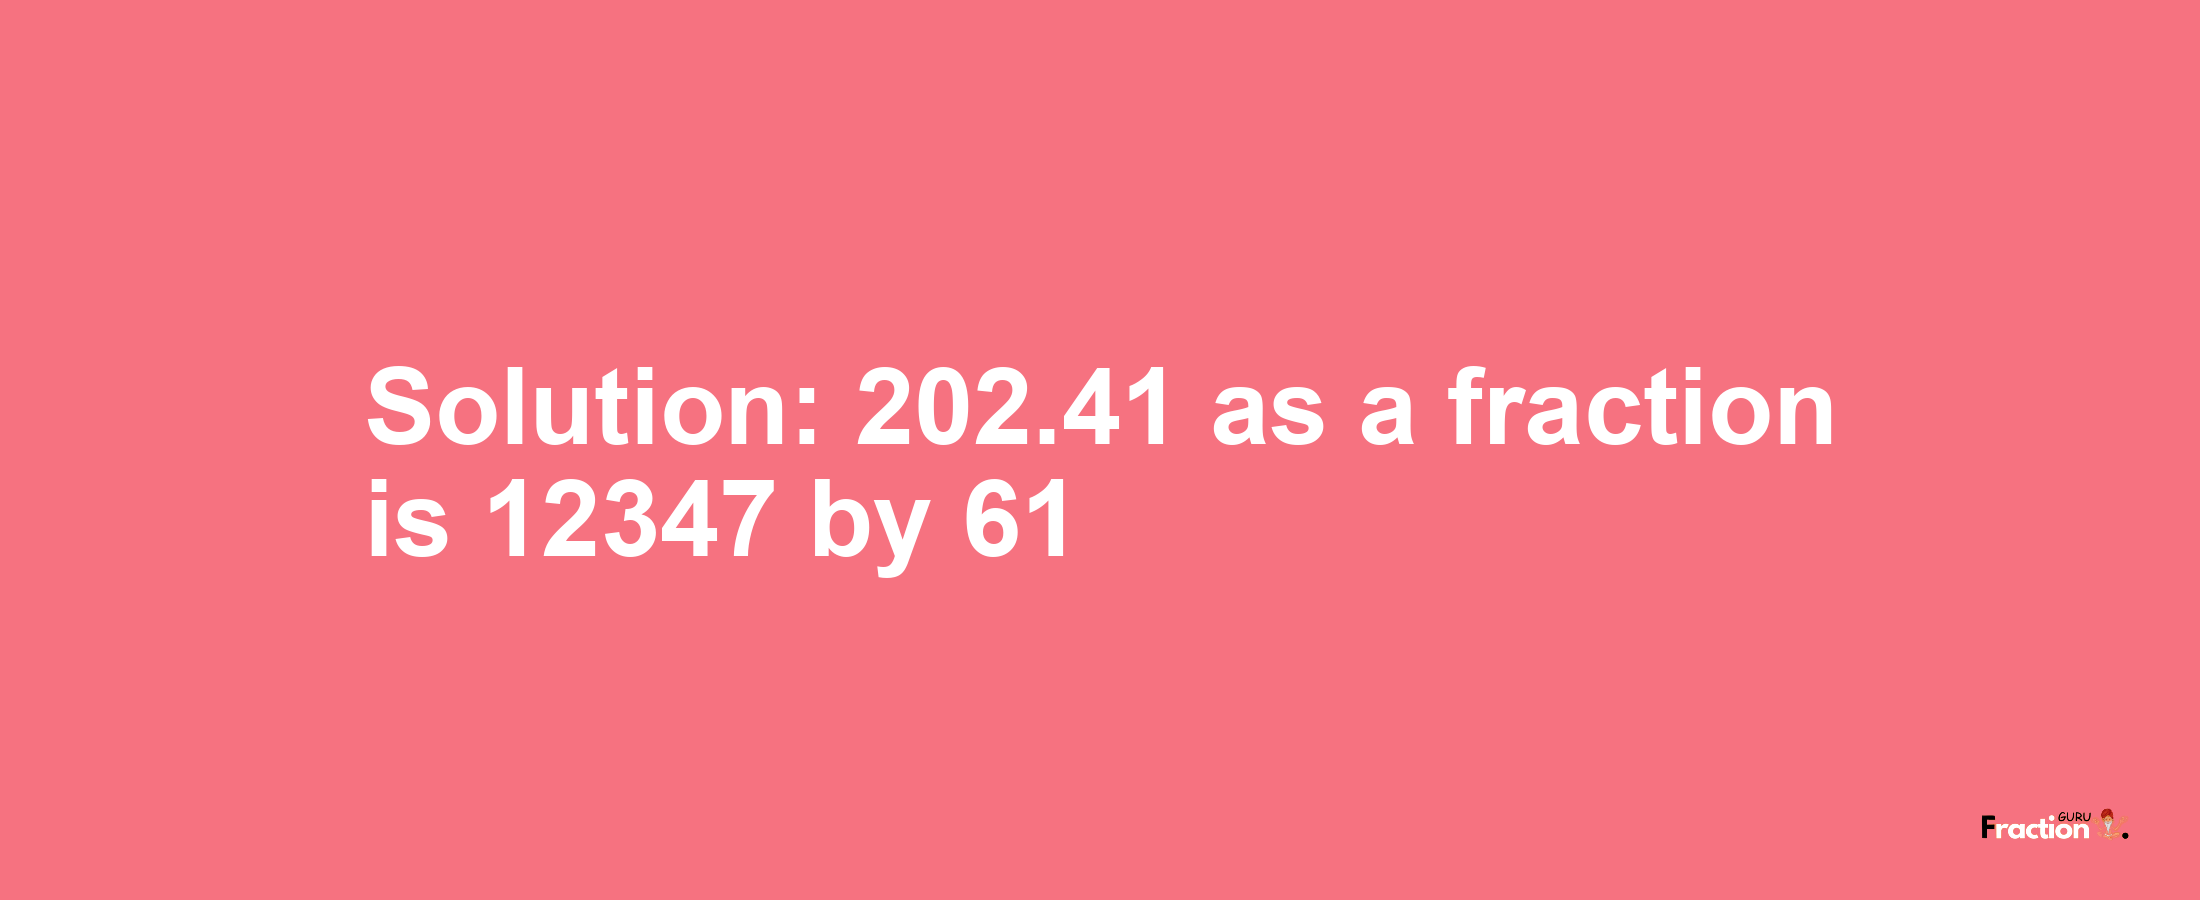 Solution:202.41 as a fraction is 12347/61